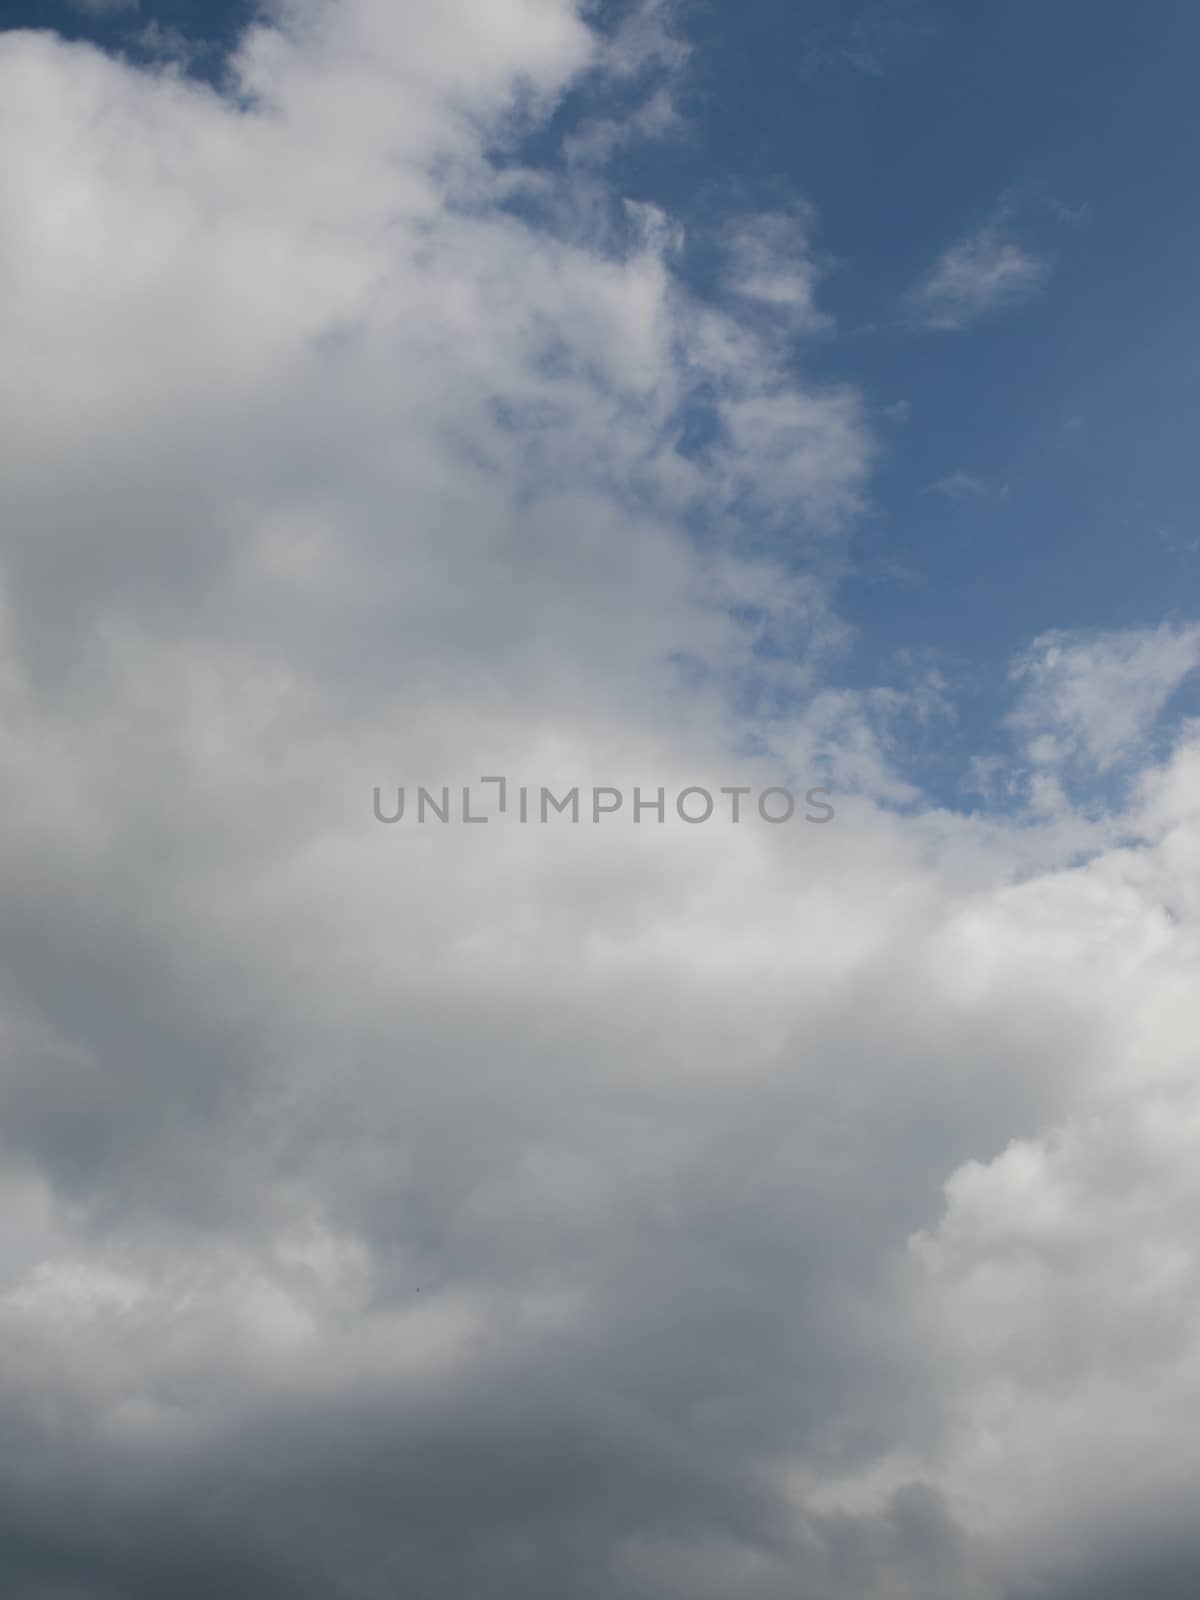 CLOUDY SKY IN DAYTIME, STOCK PHOTO by PrettyTG